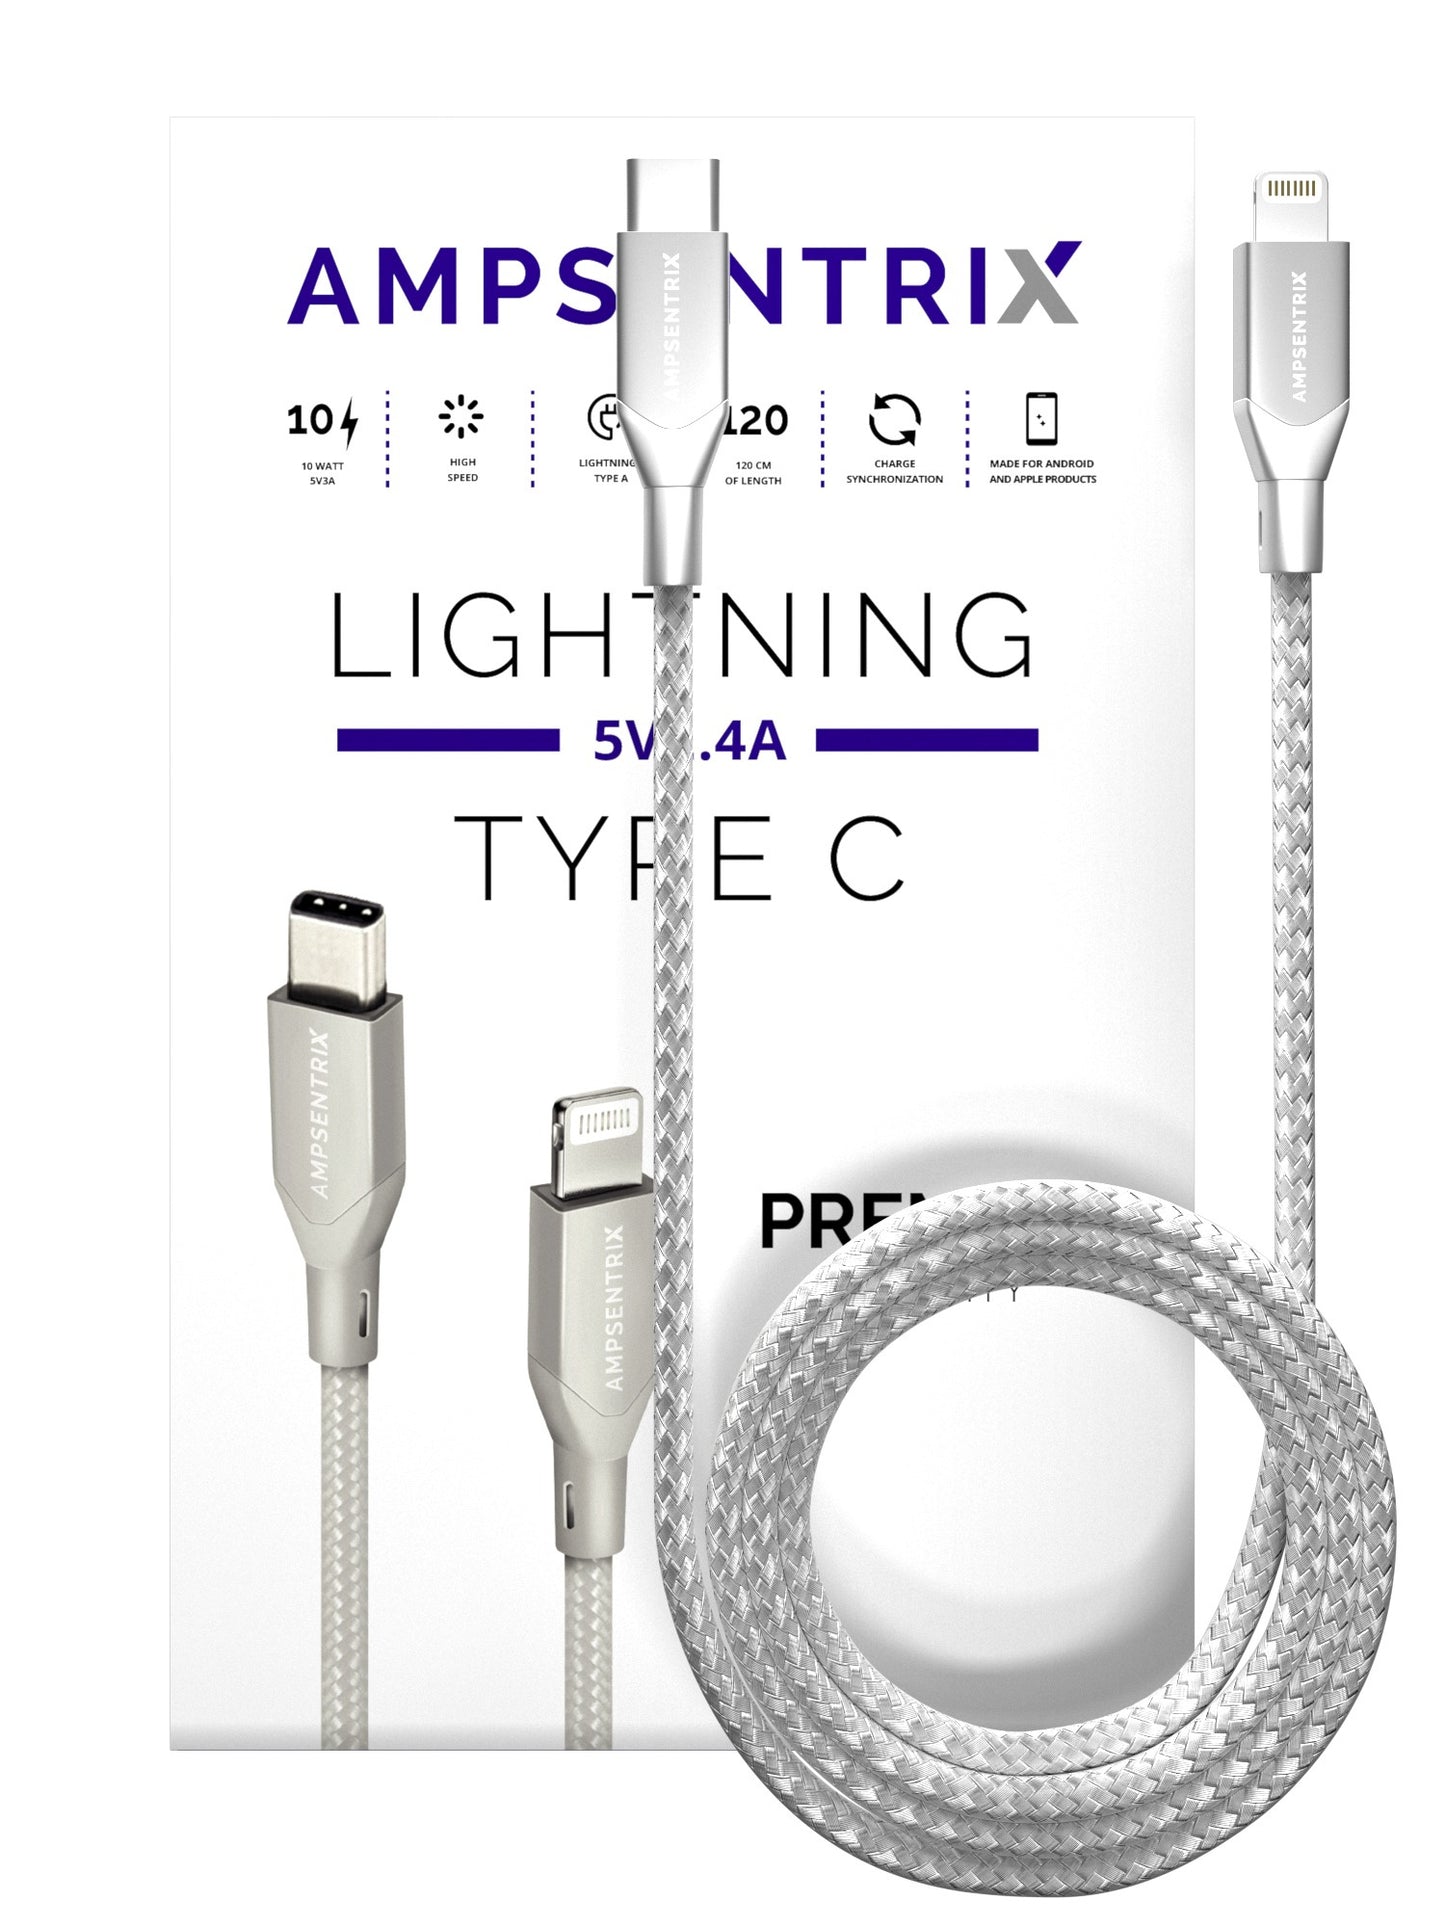 3 ft Non-MFI Lightning to USB Type C Cable (AmpSentrix) (Infinity) (Silver)